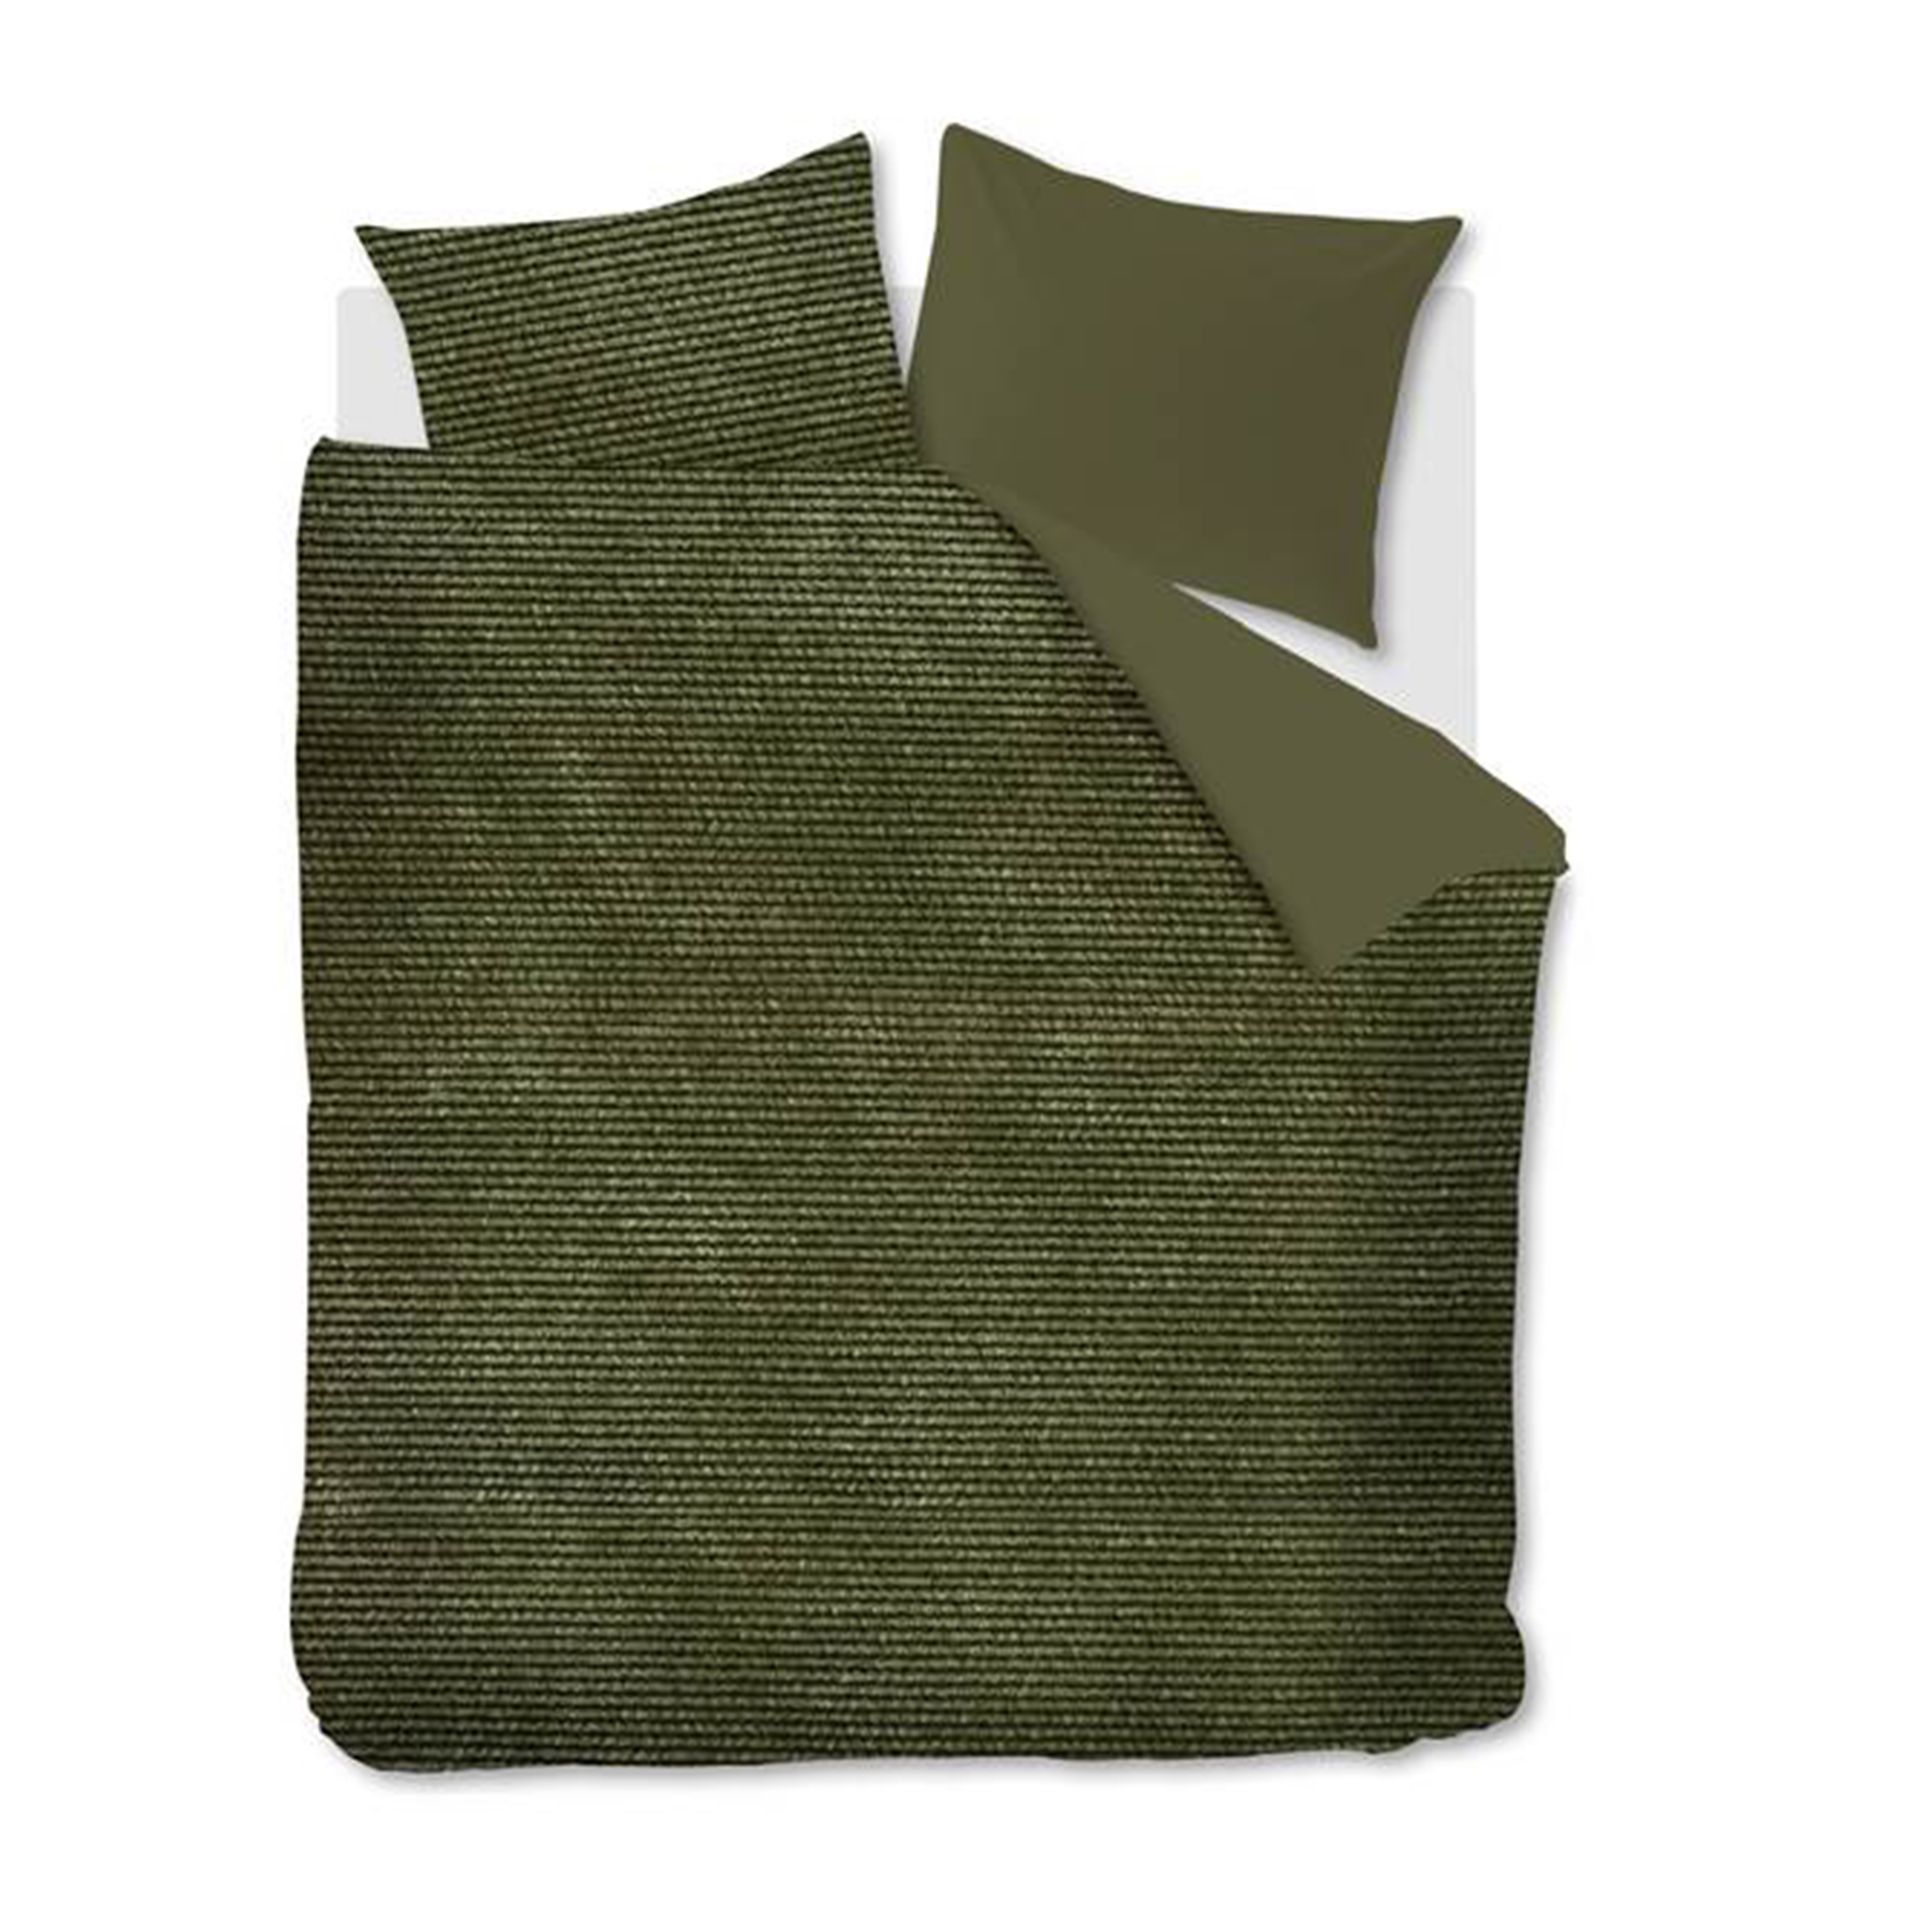 At Home by BeddingHouse - Cosy Corduroy Green dekb